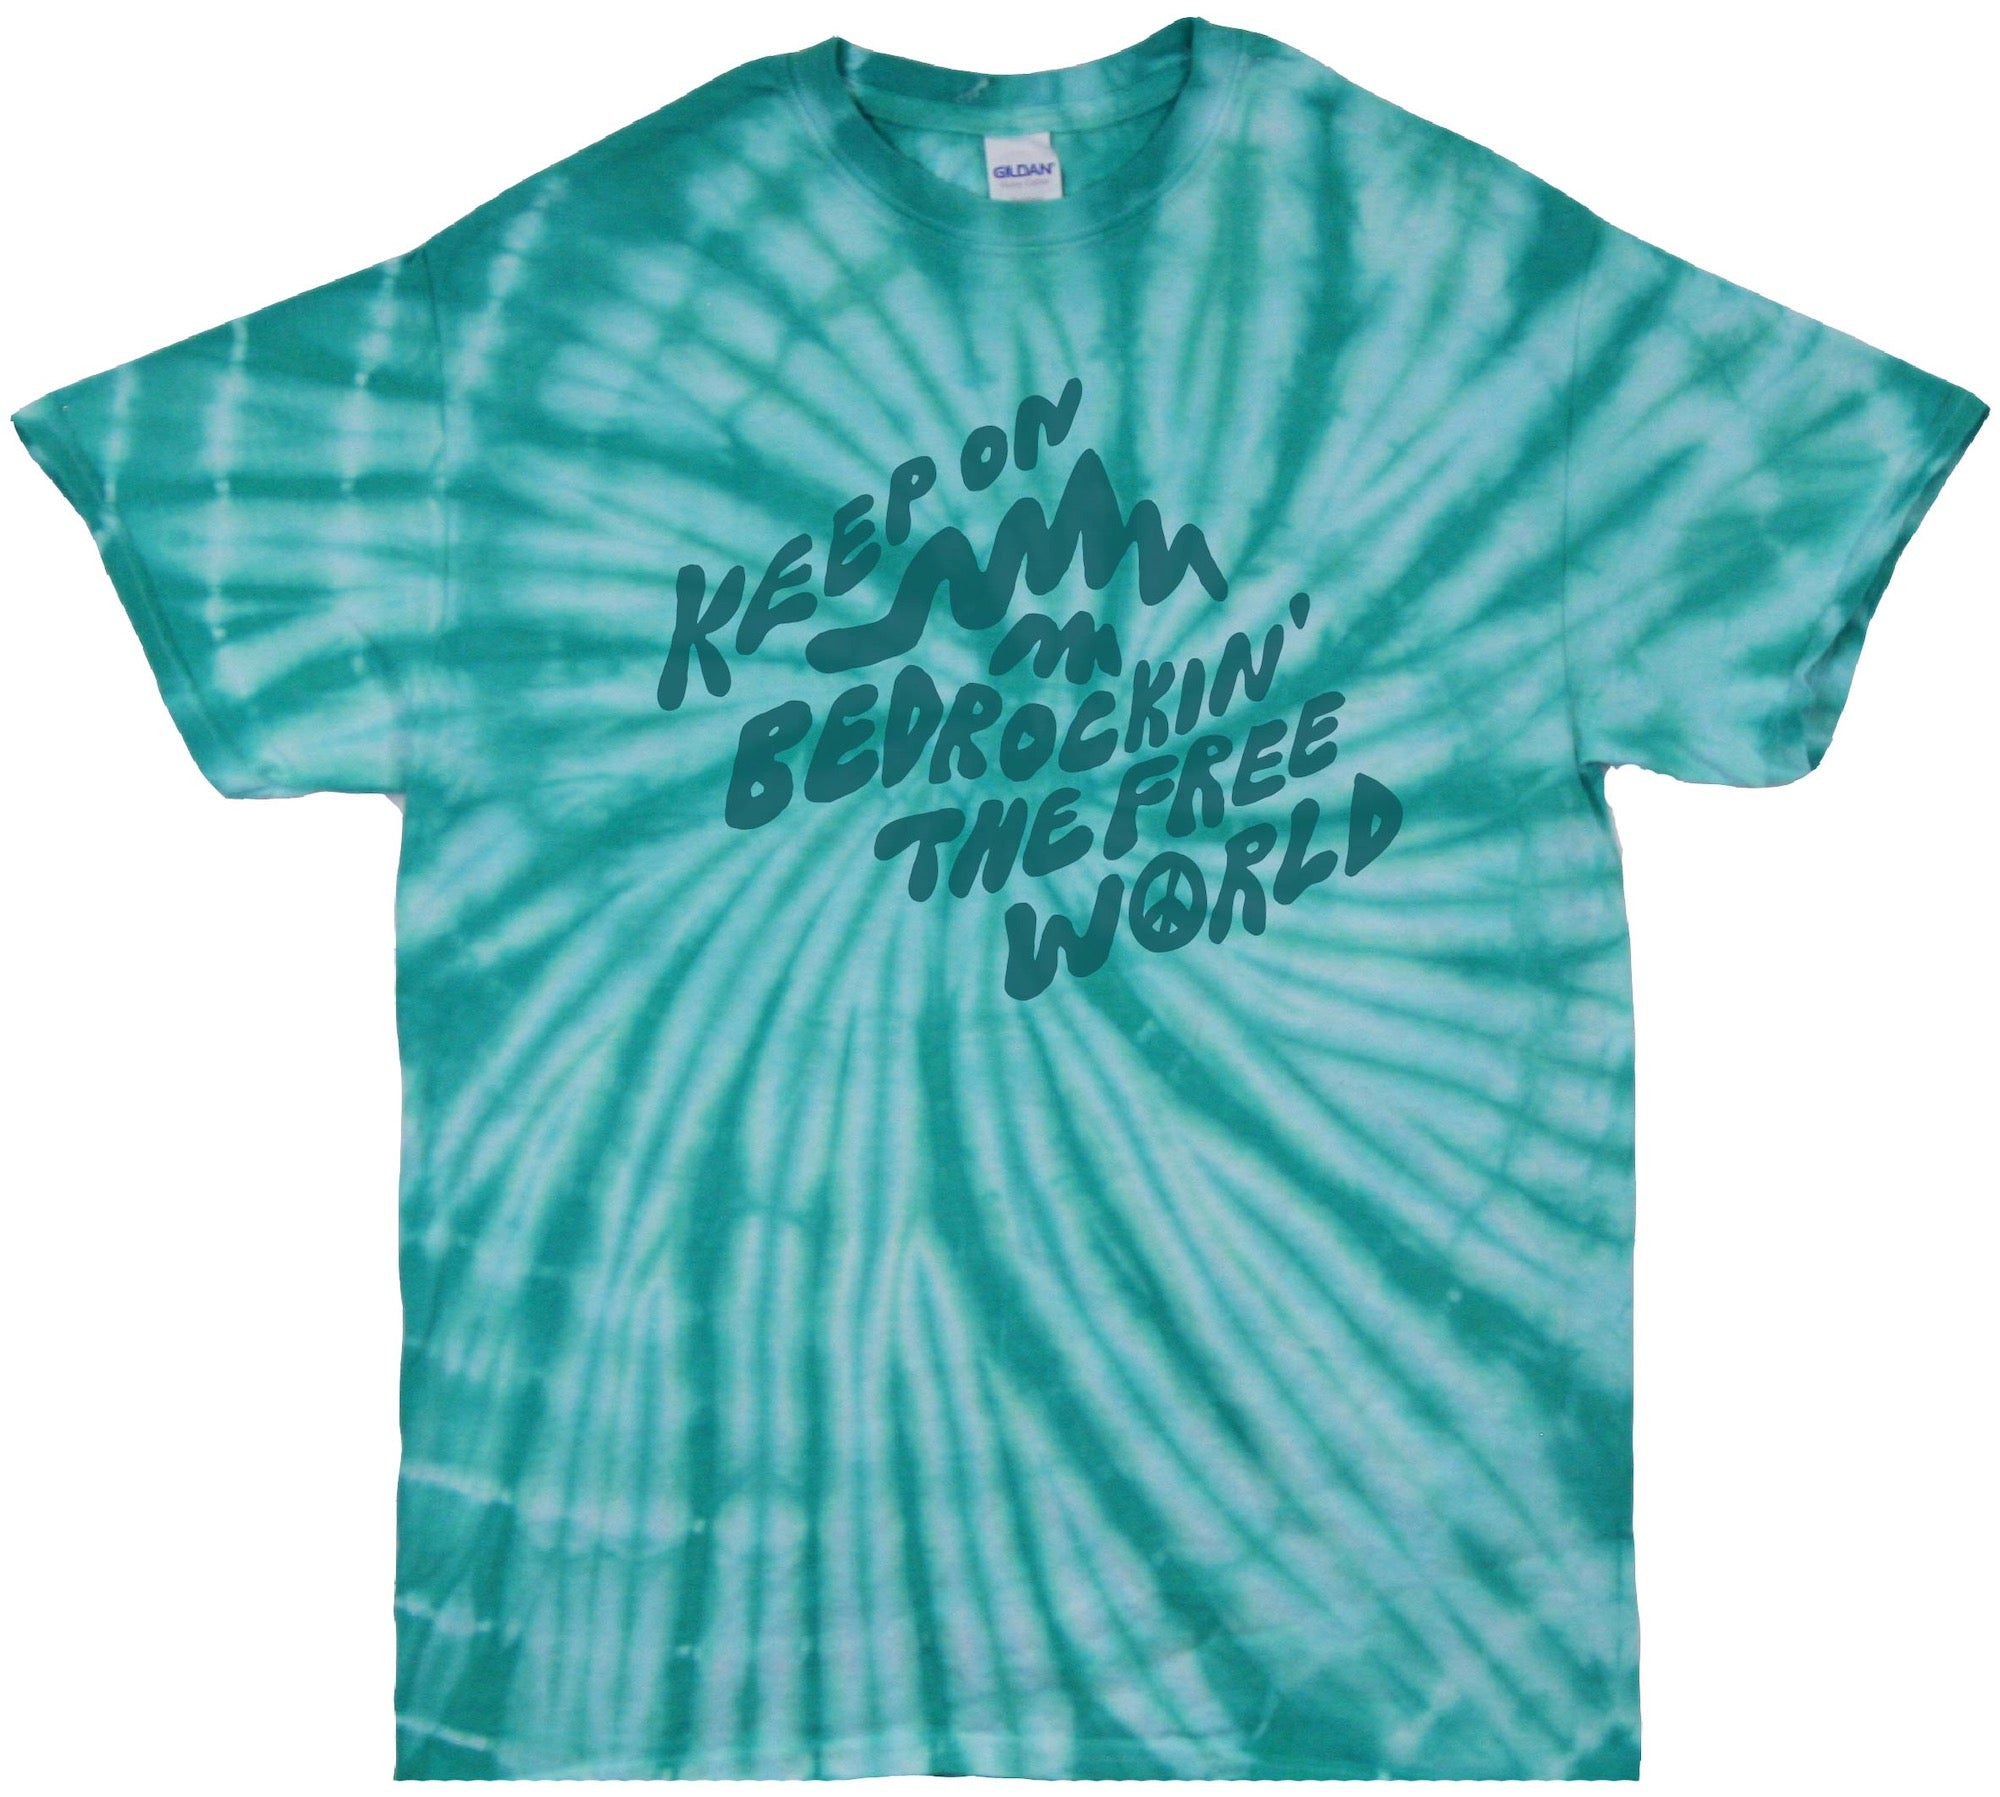 Blue Tie Dyed T-Shirt with Keep on Bedrockin' the Free World design - Front